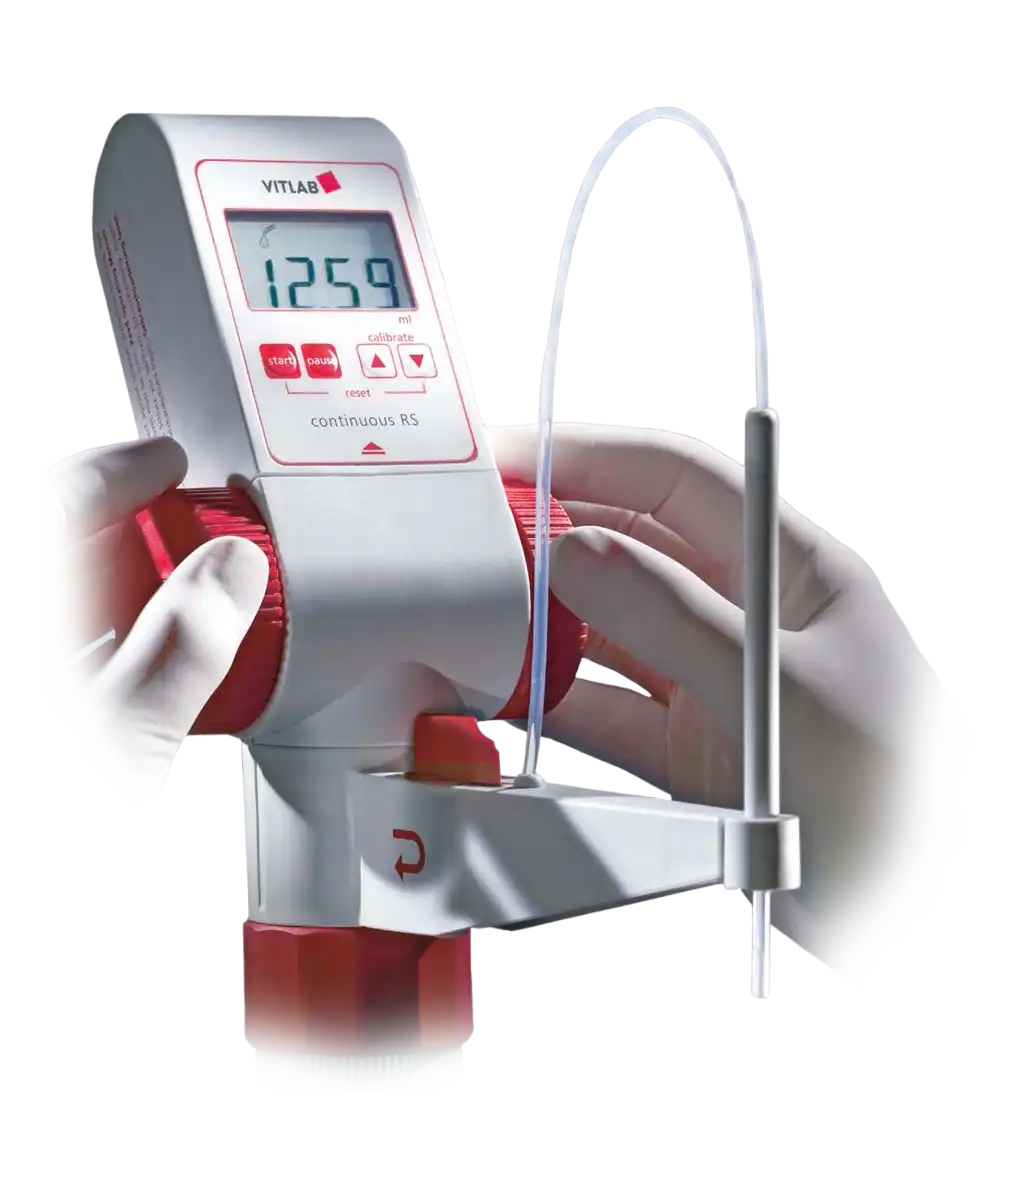 Bottle-Top Burette (Titrator), Continuous E, Digital, with Recirculation Valve 25 ml Capacity, 0,05 ml Accuracy, W/O PC Interface